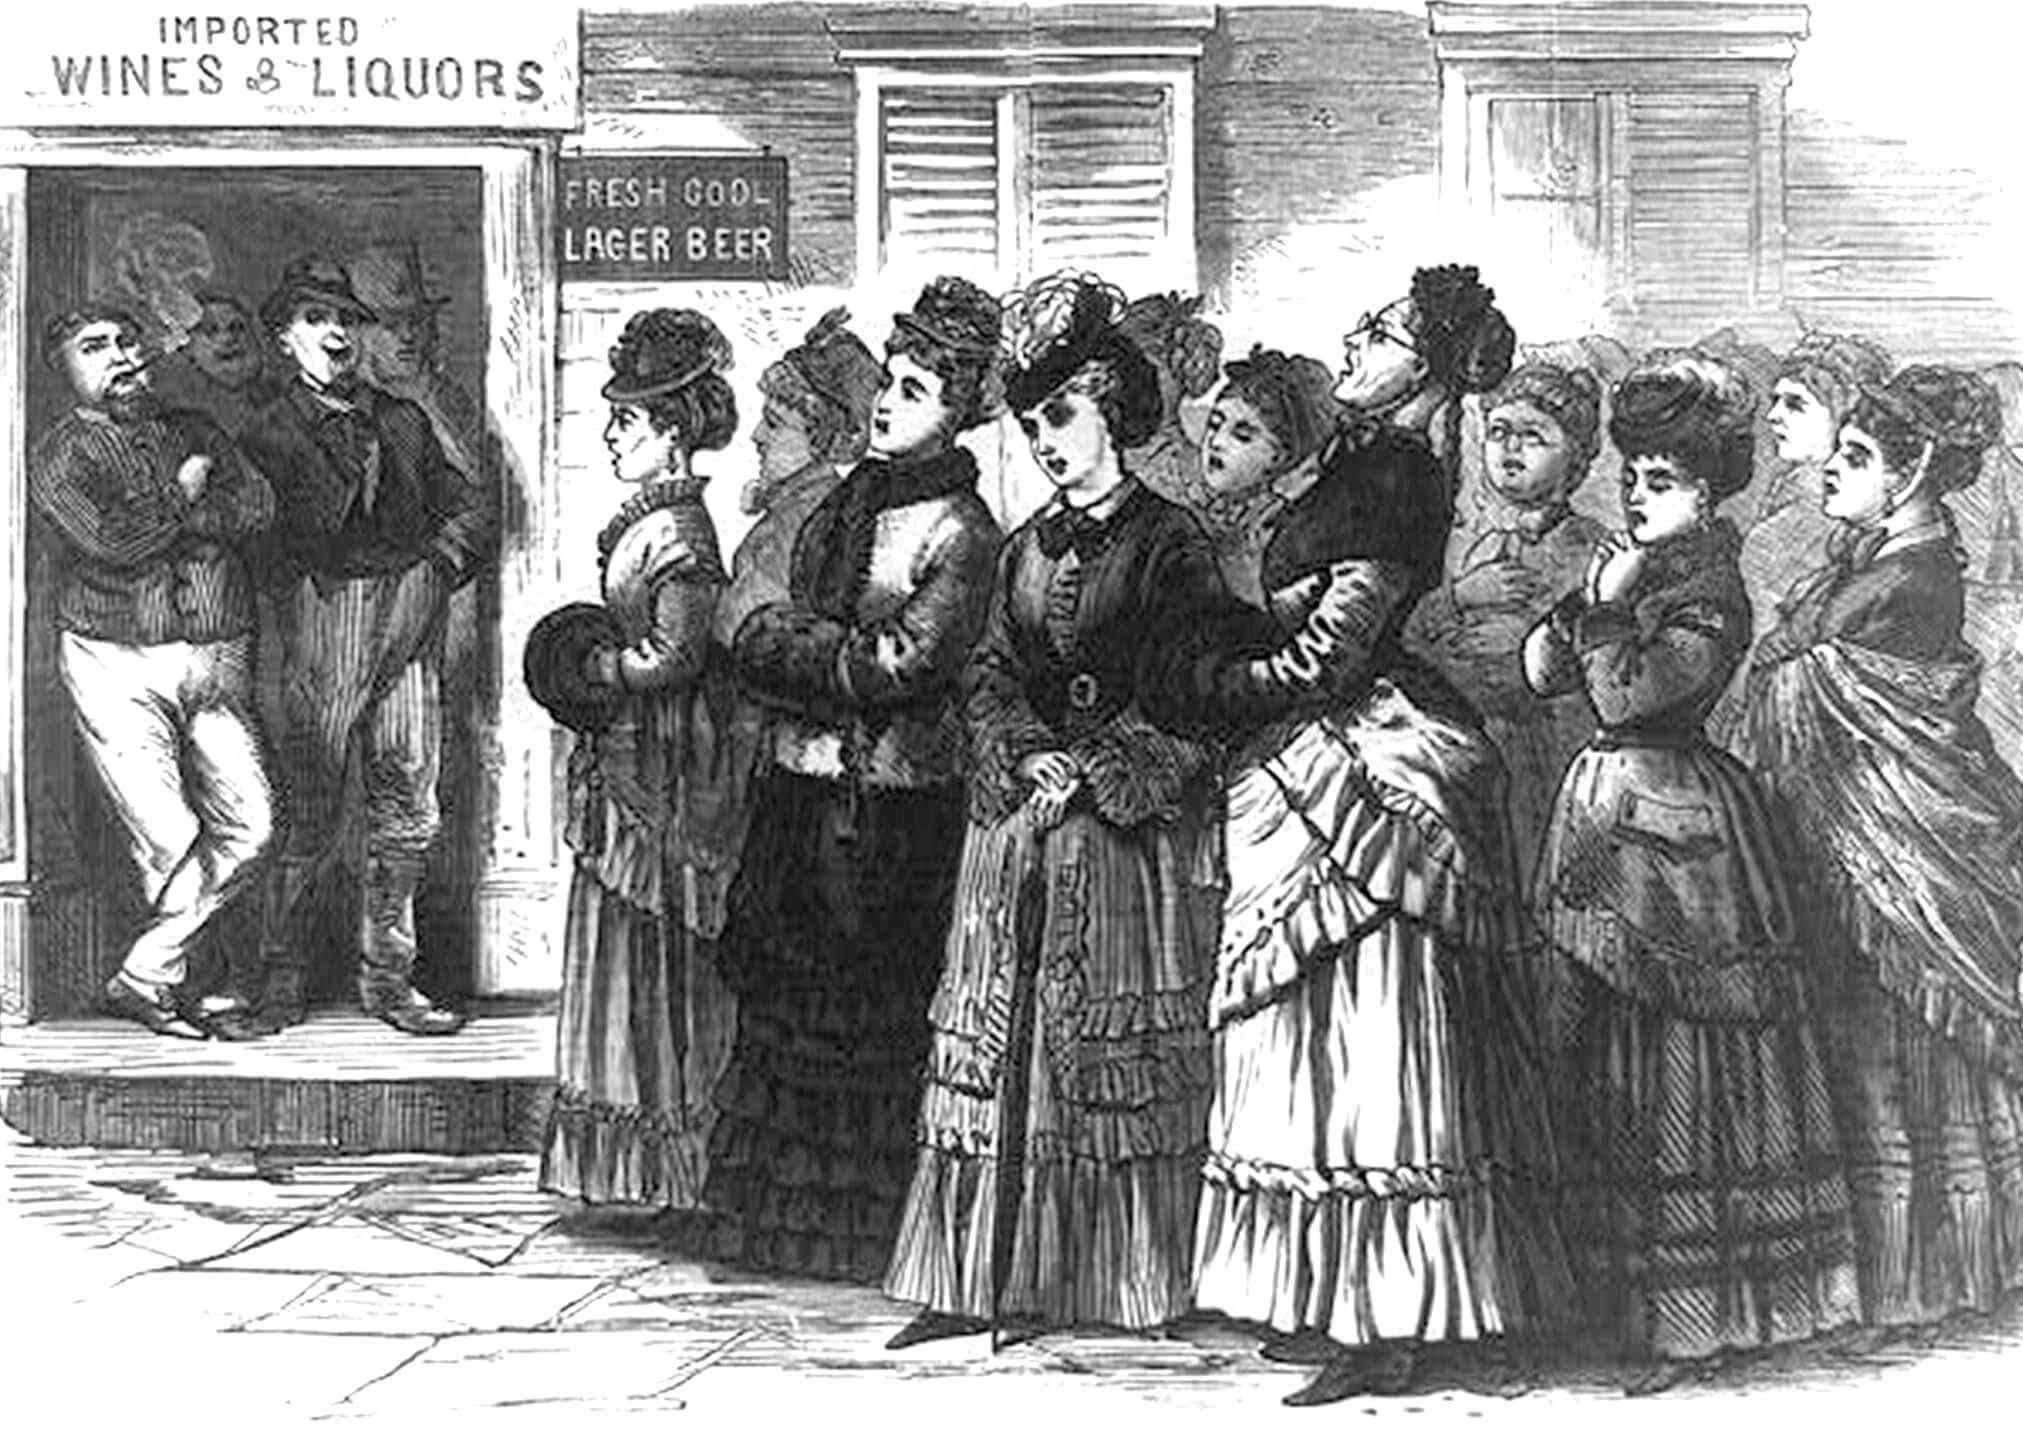 Large group of women in dresses stand outside a saloon. Saloon has a 'fresh cool lager beer' sign in the window. A group of men stands in the door, smoking and looking on in contempt.